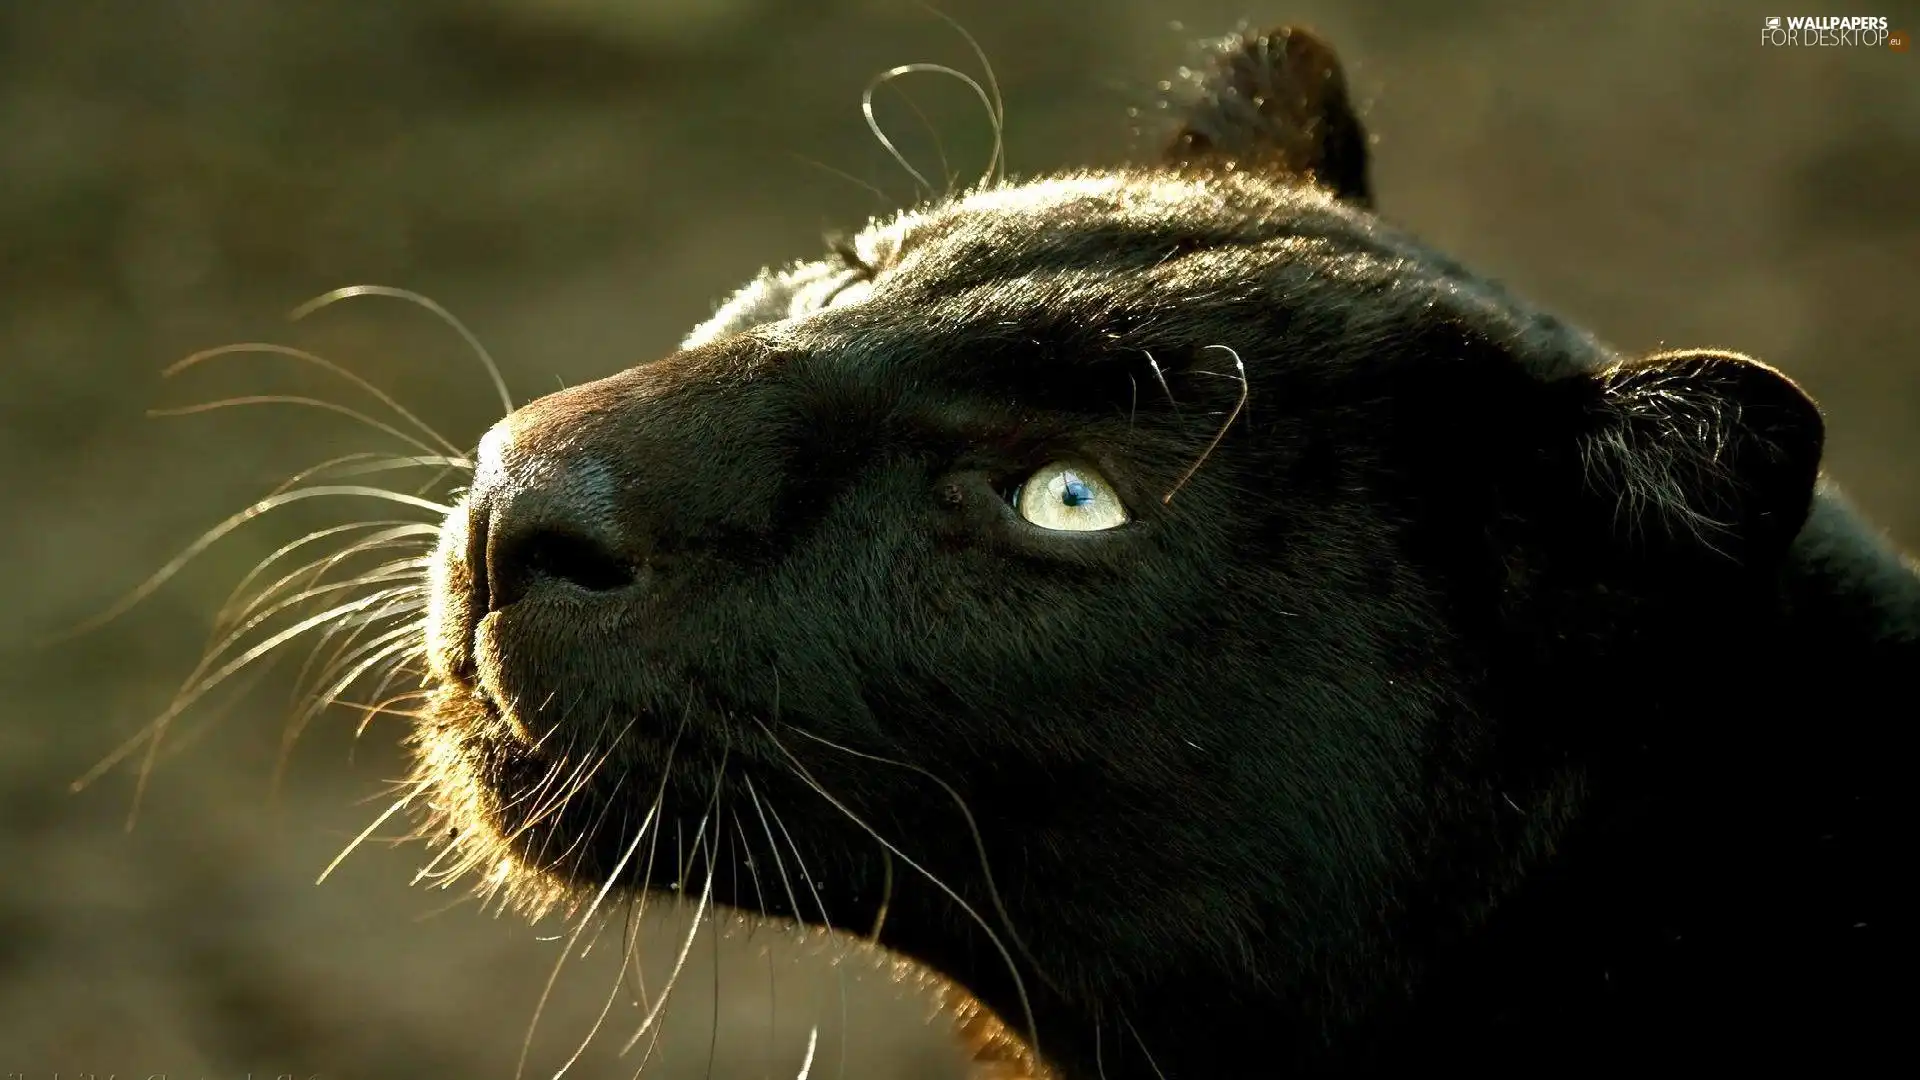 Panther, Head